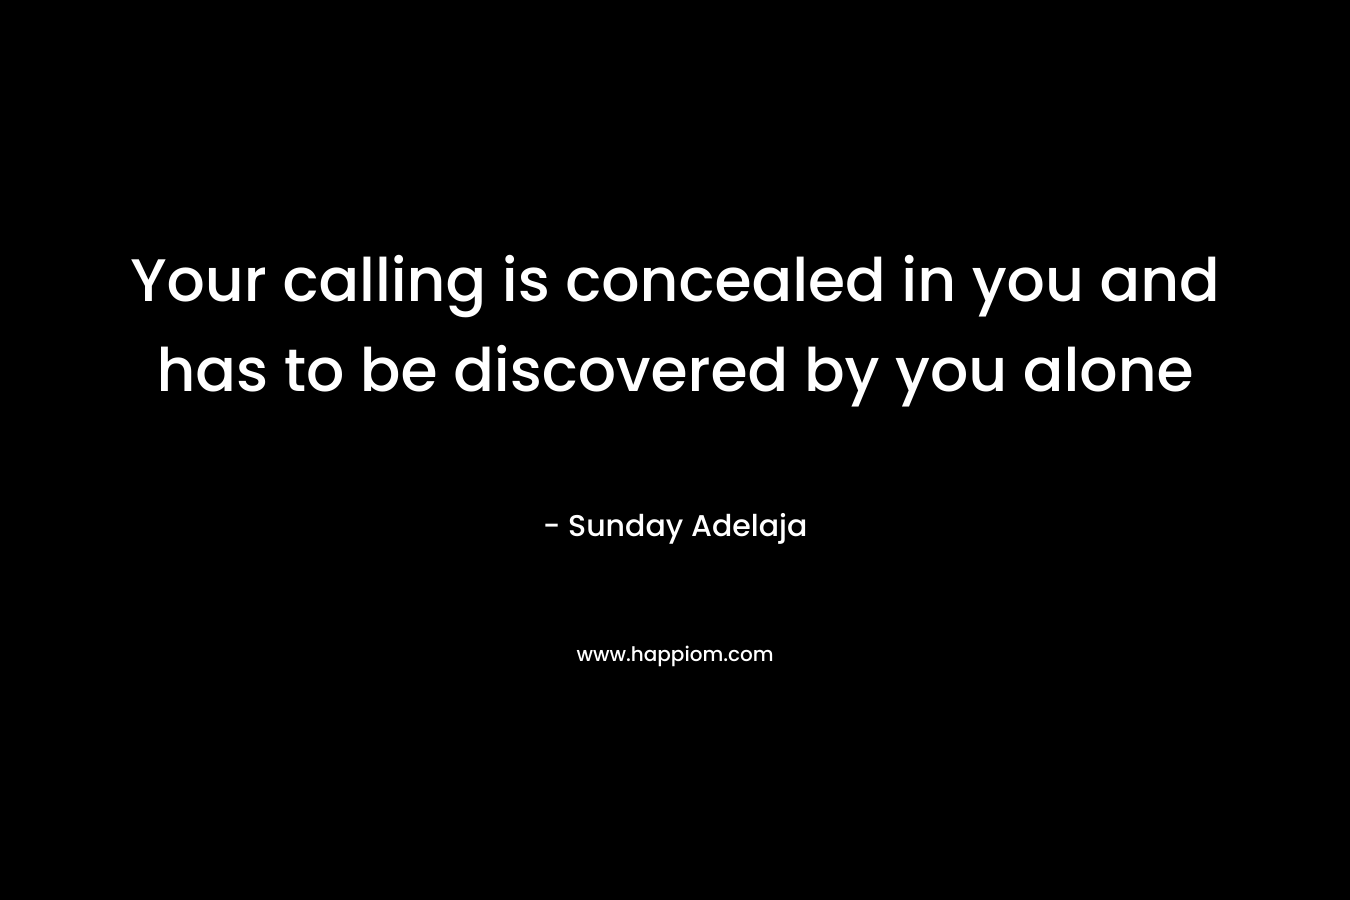 Your calling is concealed in you and has to be discovered by you alone